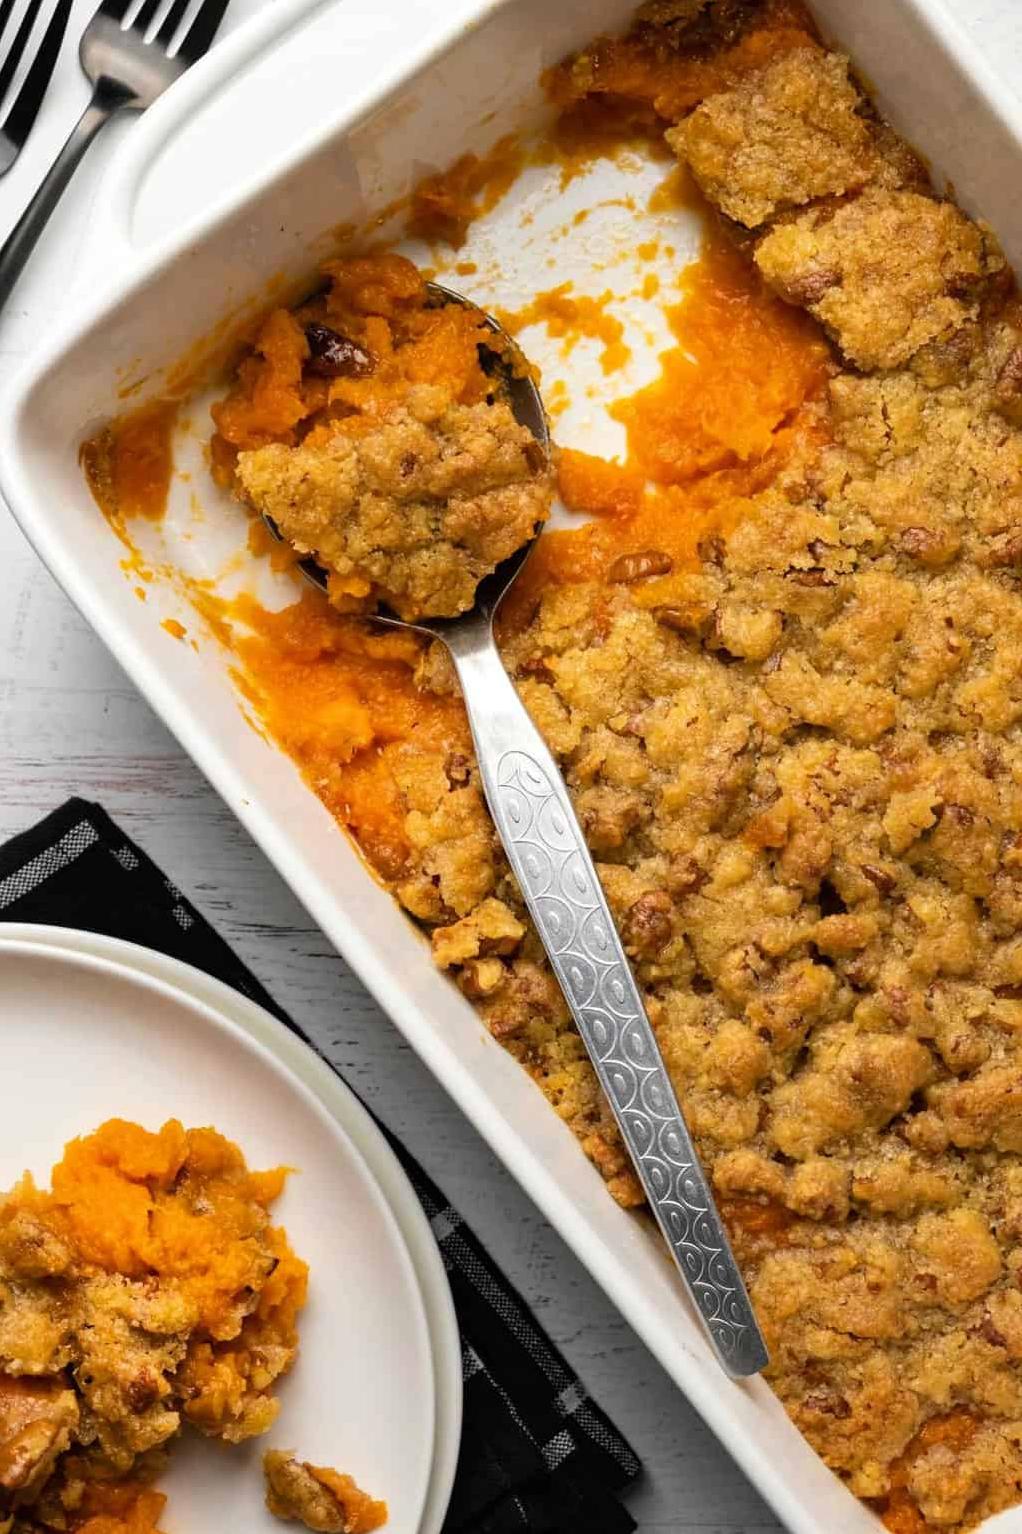  Get ready to dig into the most delicious sweet potato dish ever.